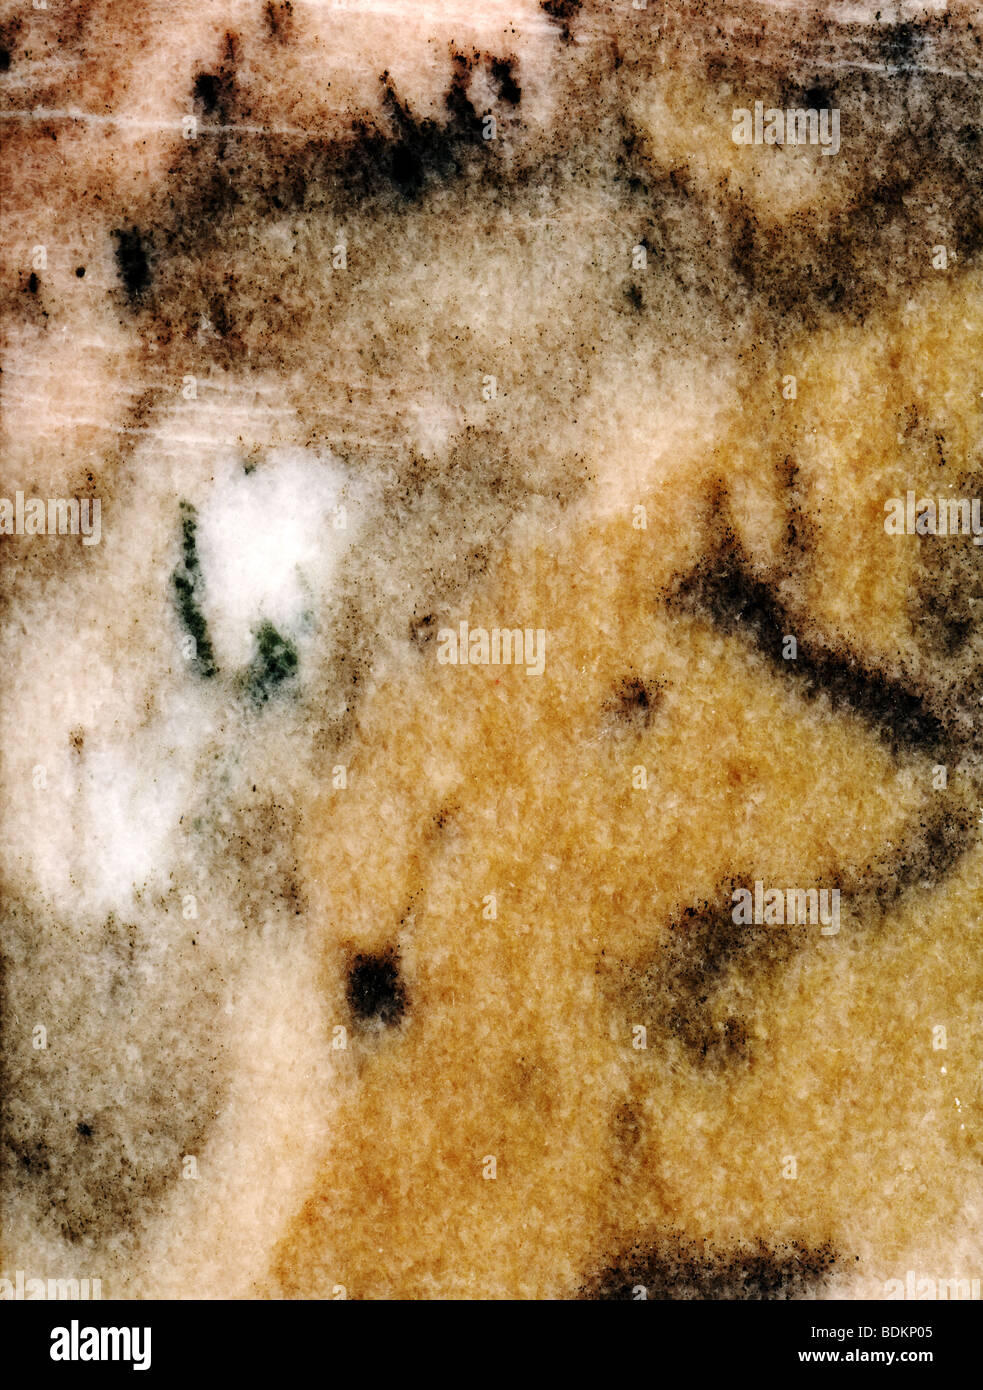 close-up showing a polished marble slab Stock Photo